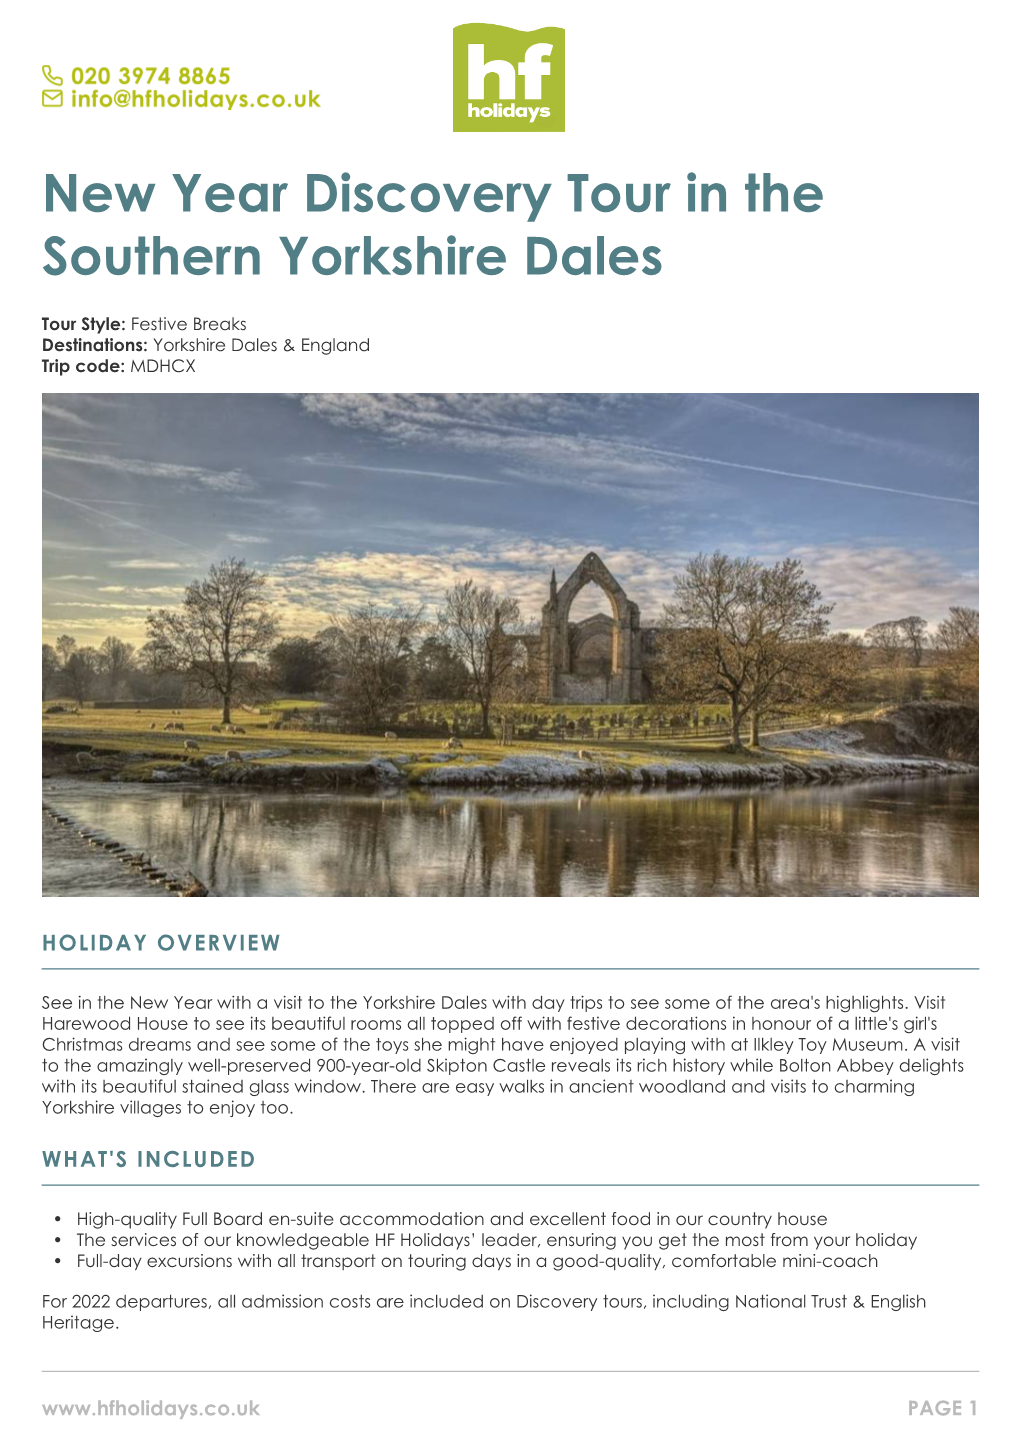 New Year Discovery Tour in the Southern Yorkshire Dales